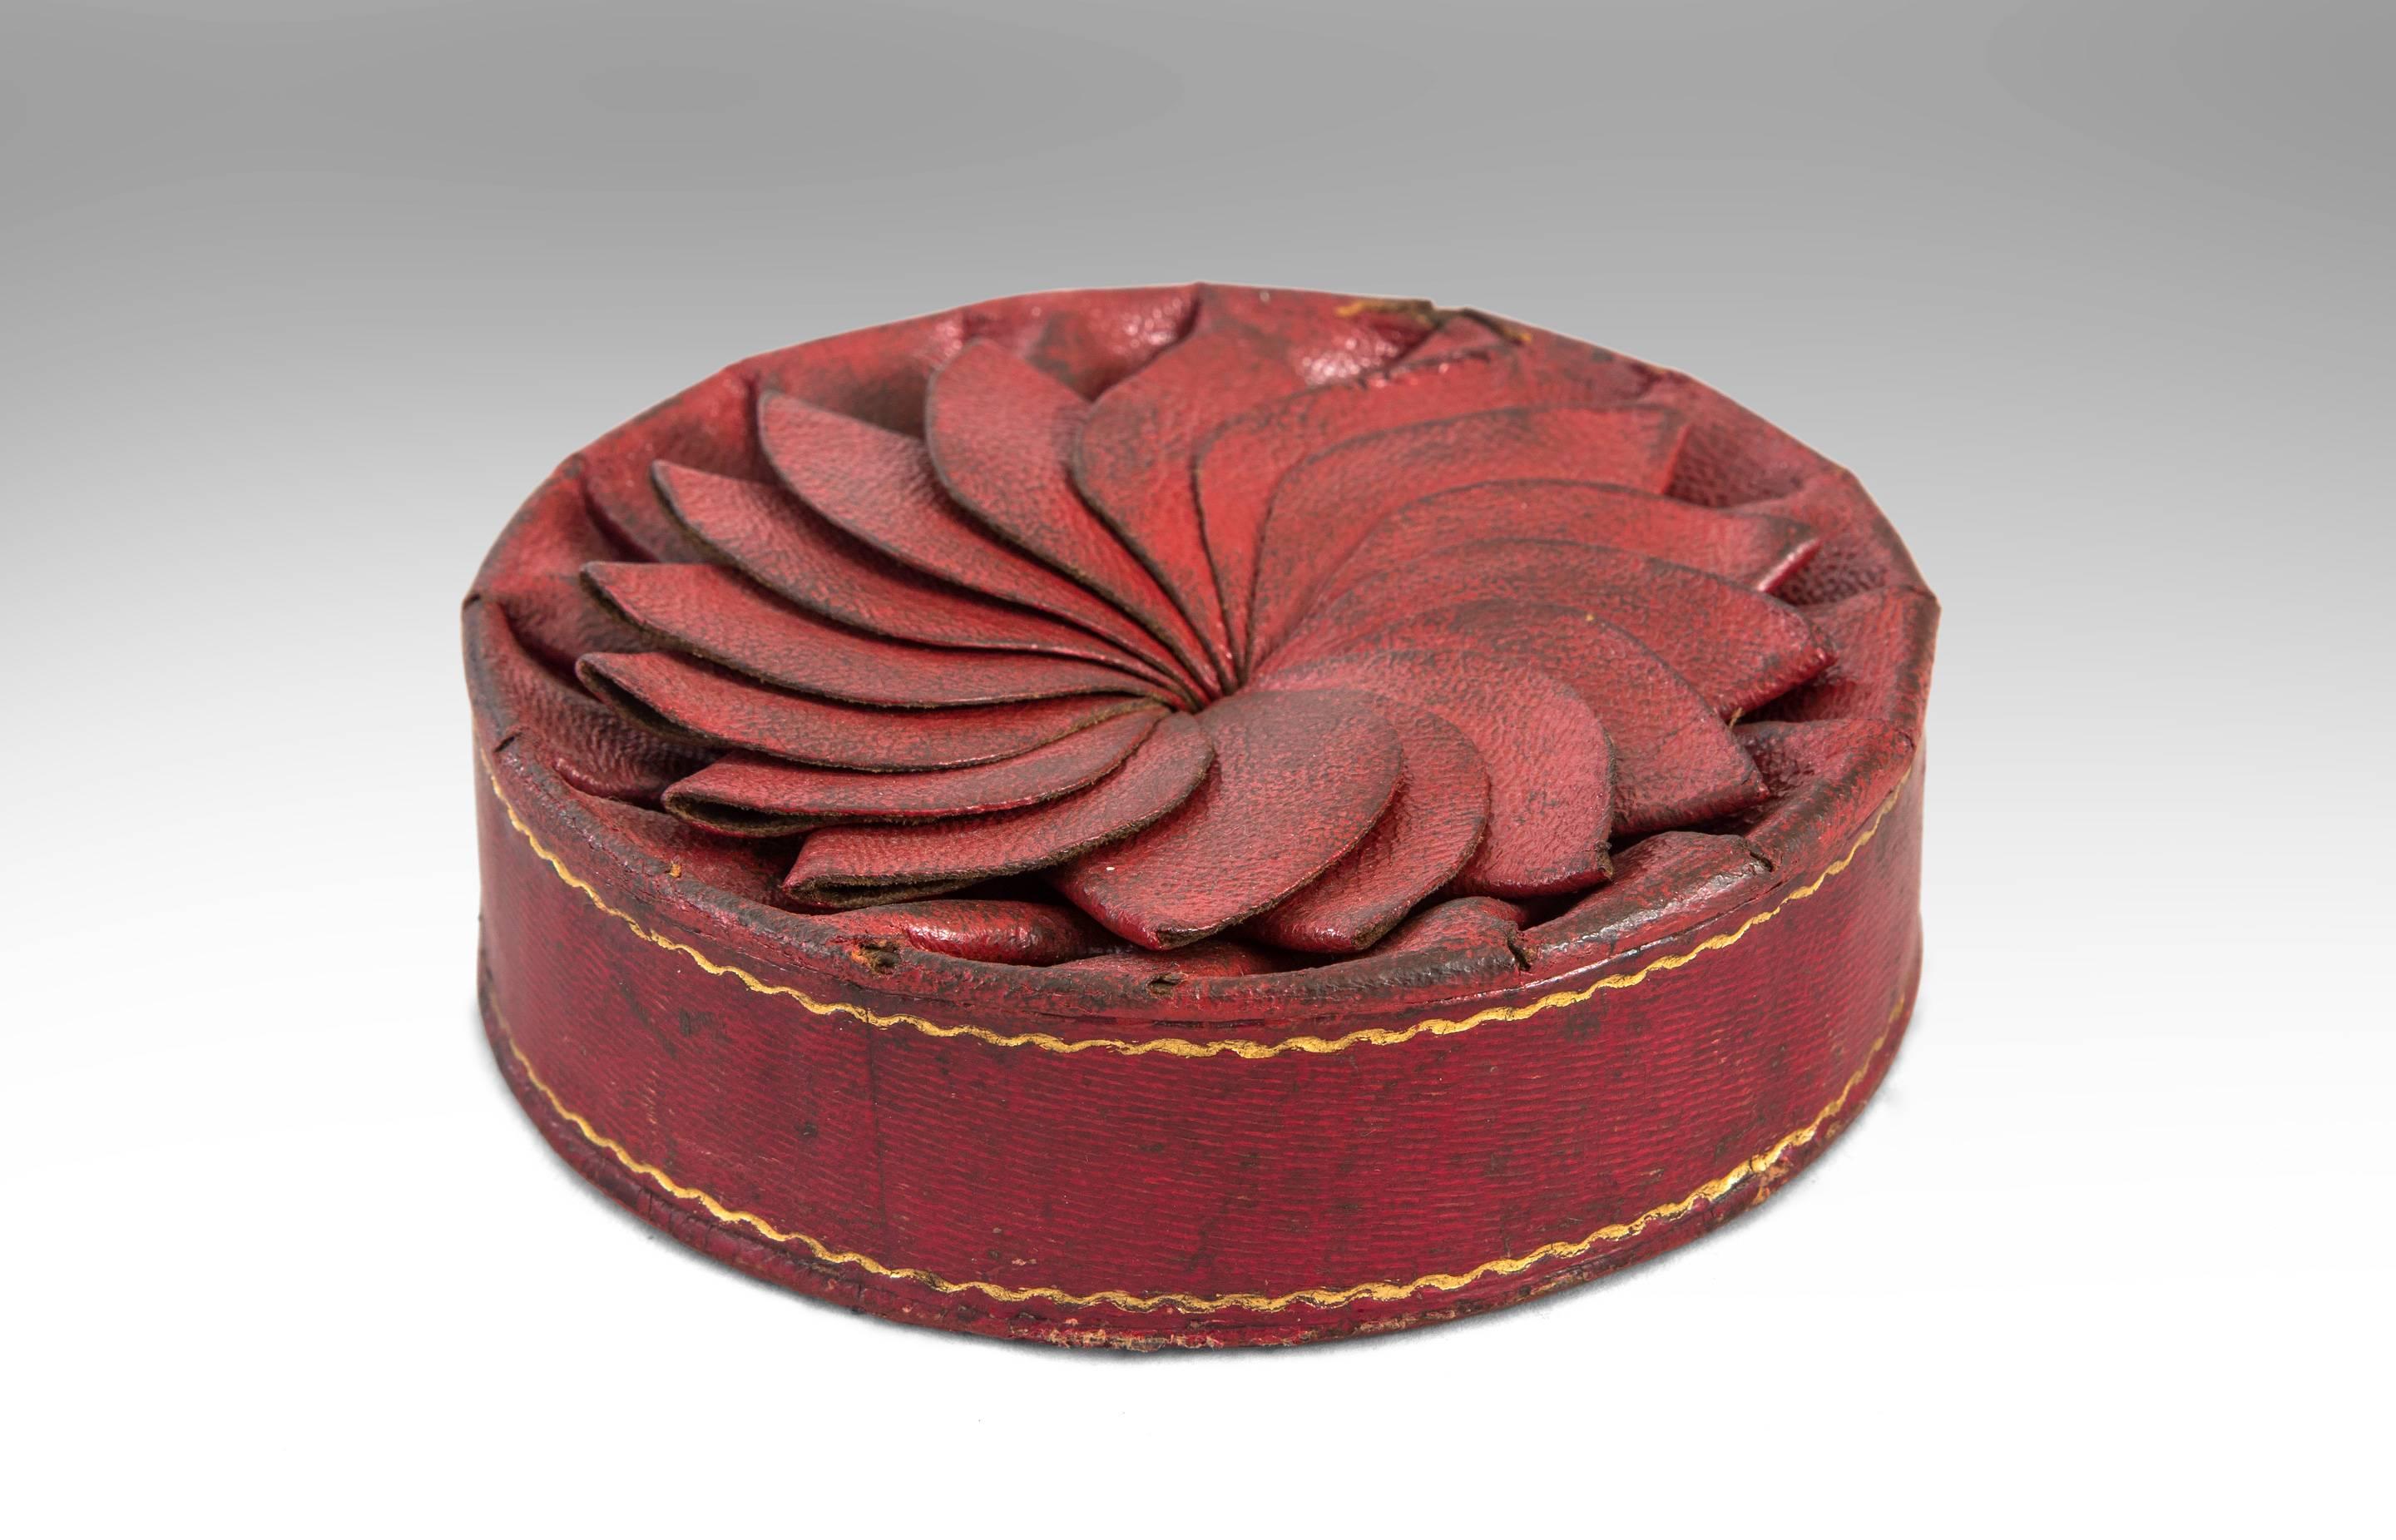 A joyful small box of surprising originality, a small wonder. The overlapping spiral folded top above the gilt tooled circular sides. Embossed: J. Chr. Lübber den 18 Junii 1836.